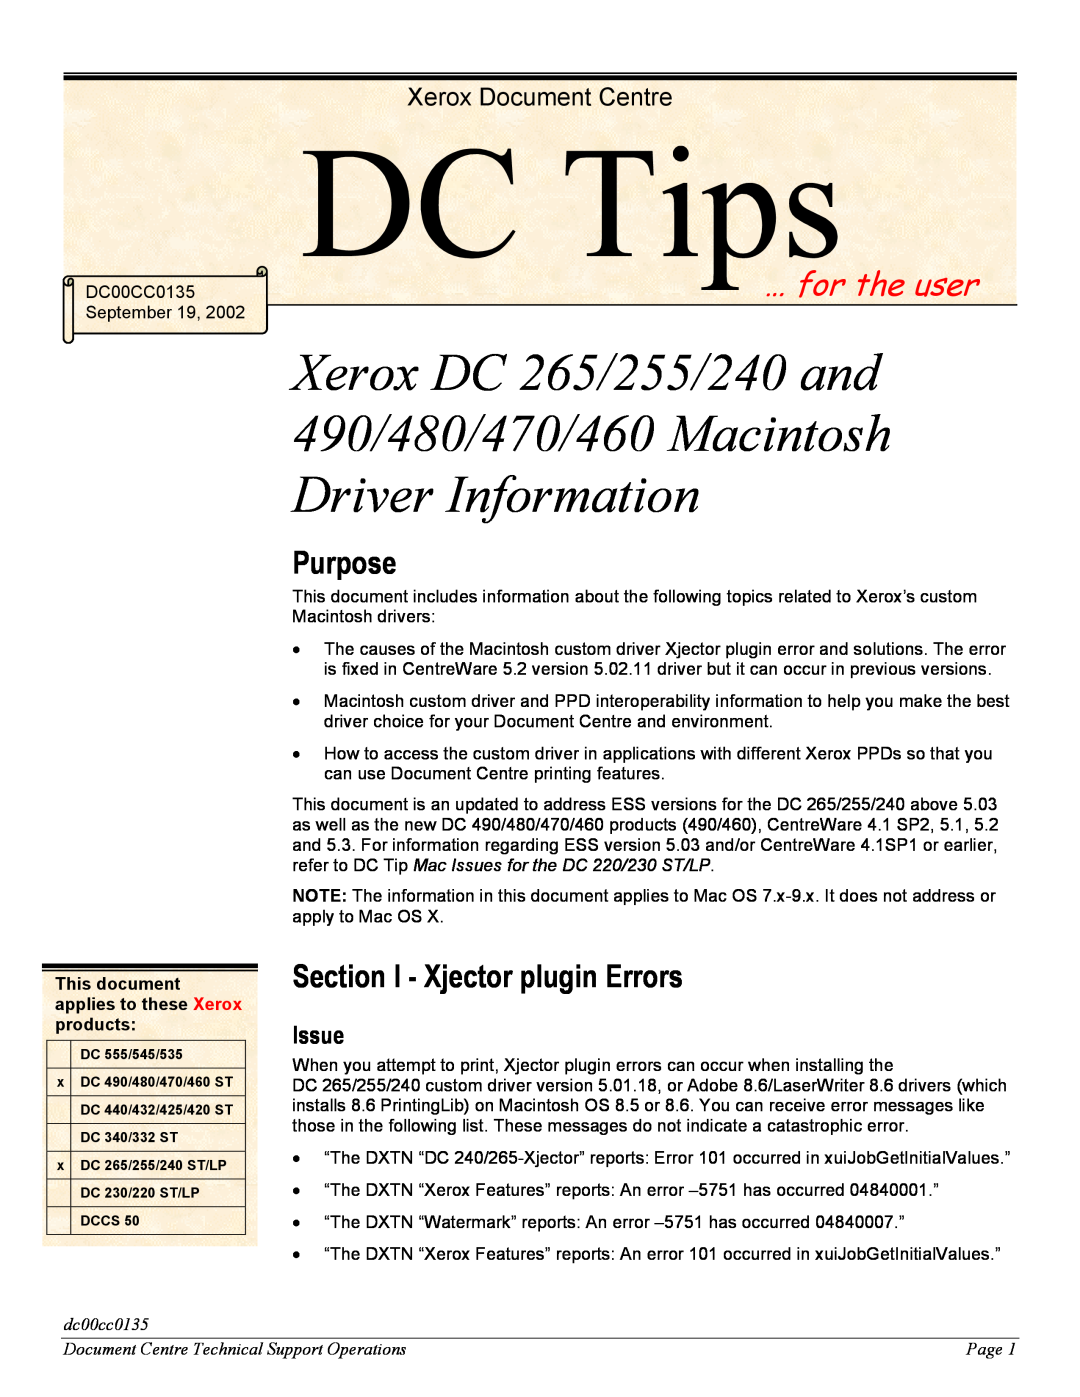 Xerox manual Purpose, Section I - Xjector plugin Errors, Issue, dc00cc0135, Page, Xerox DC 265/255/240 and 